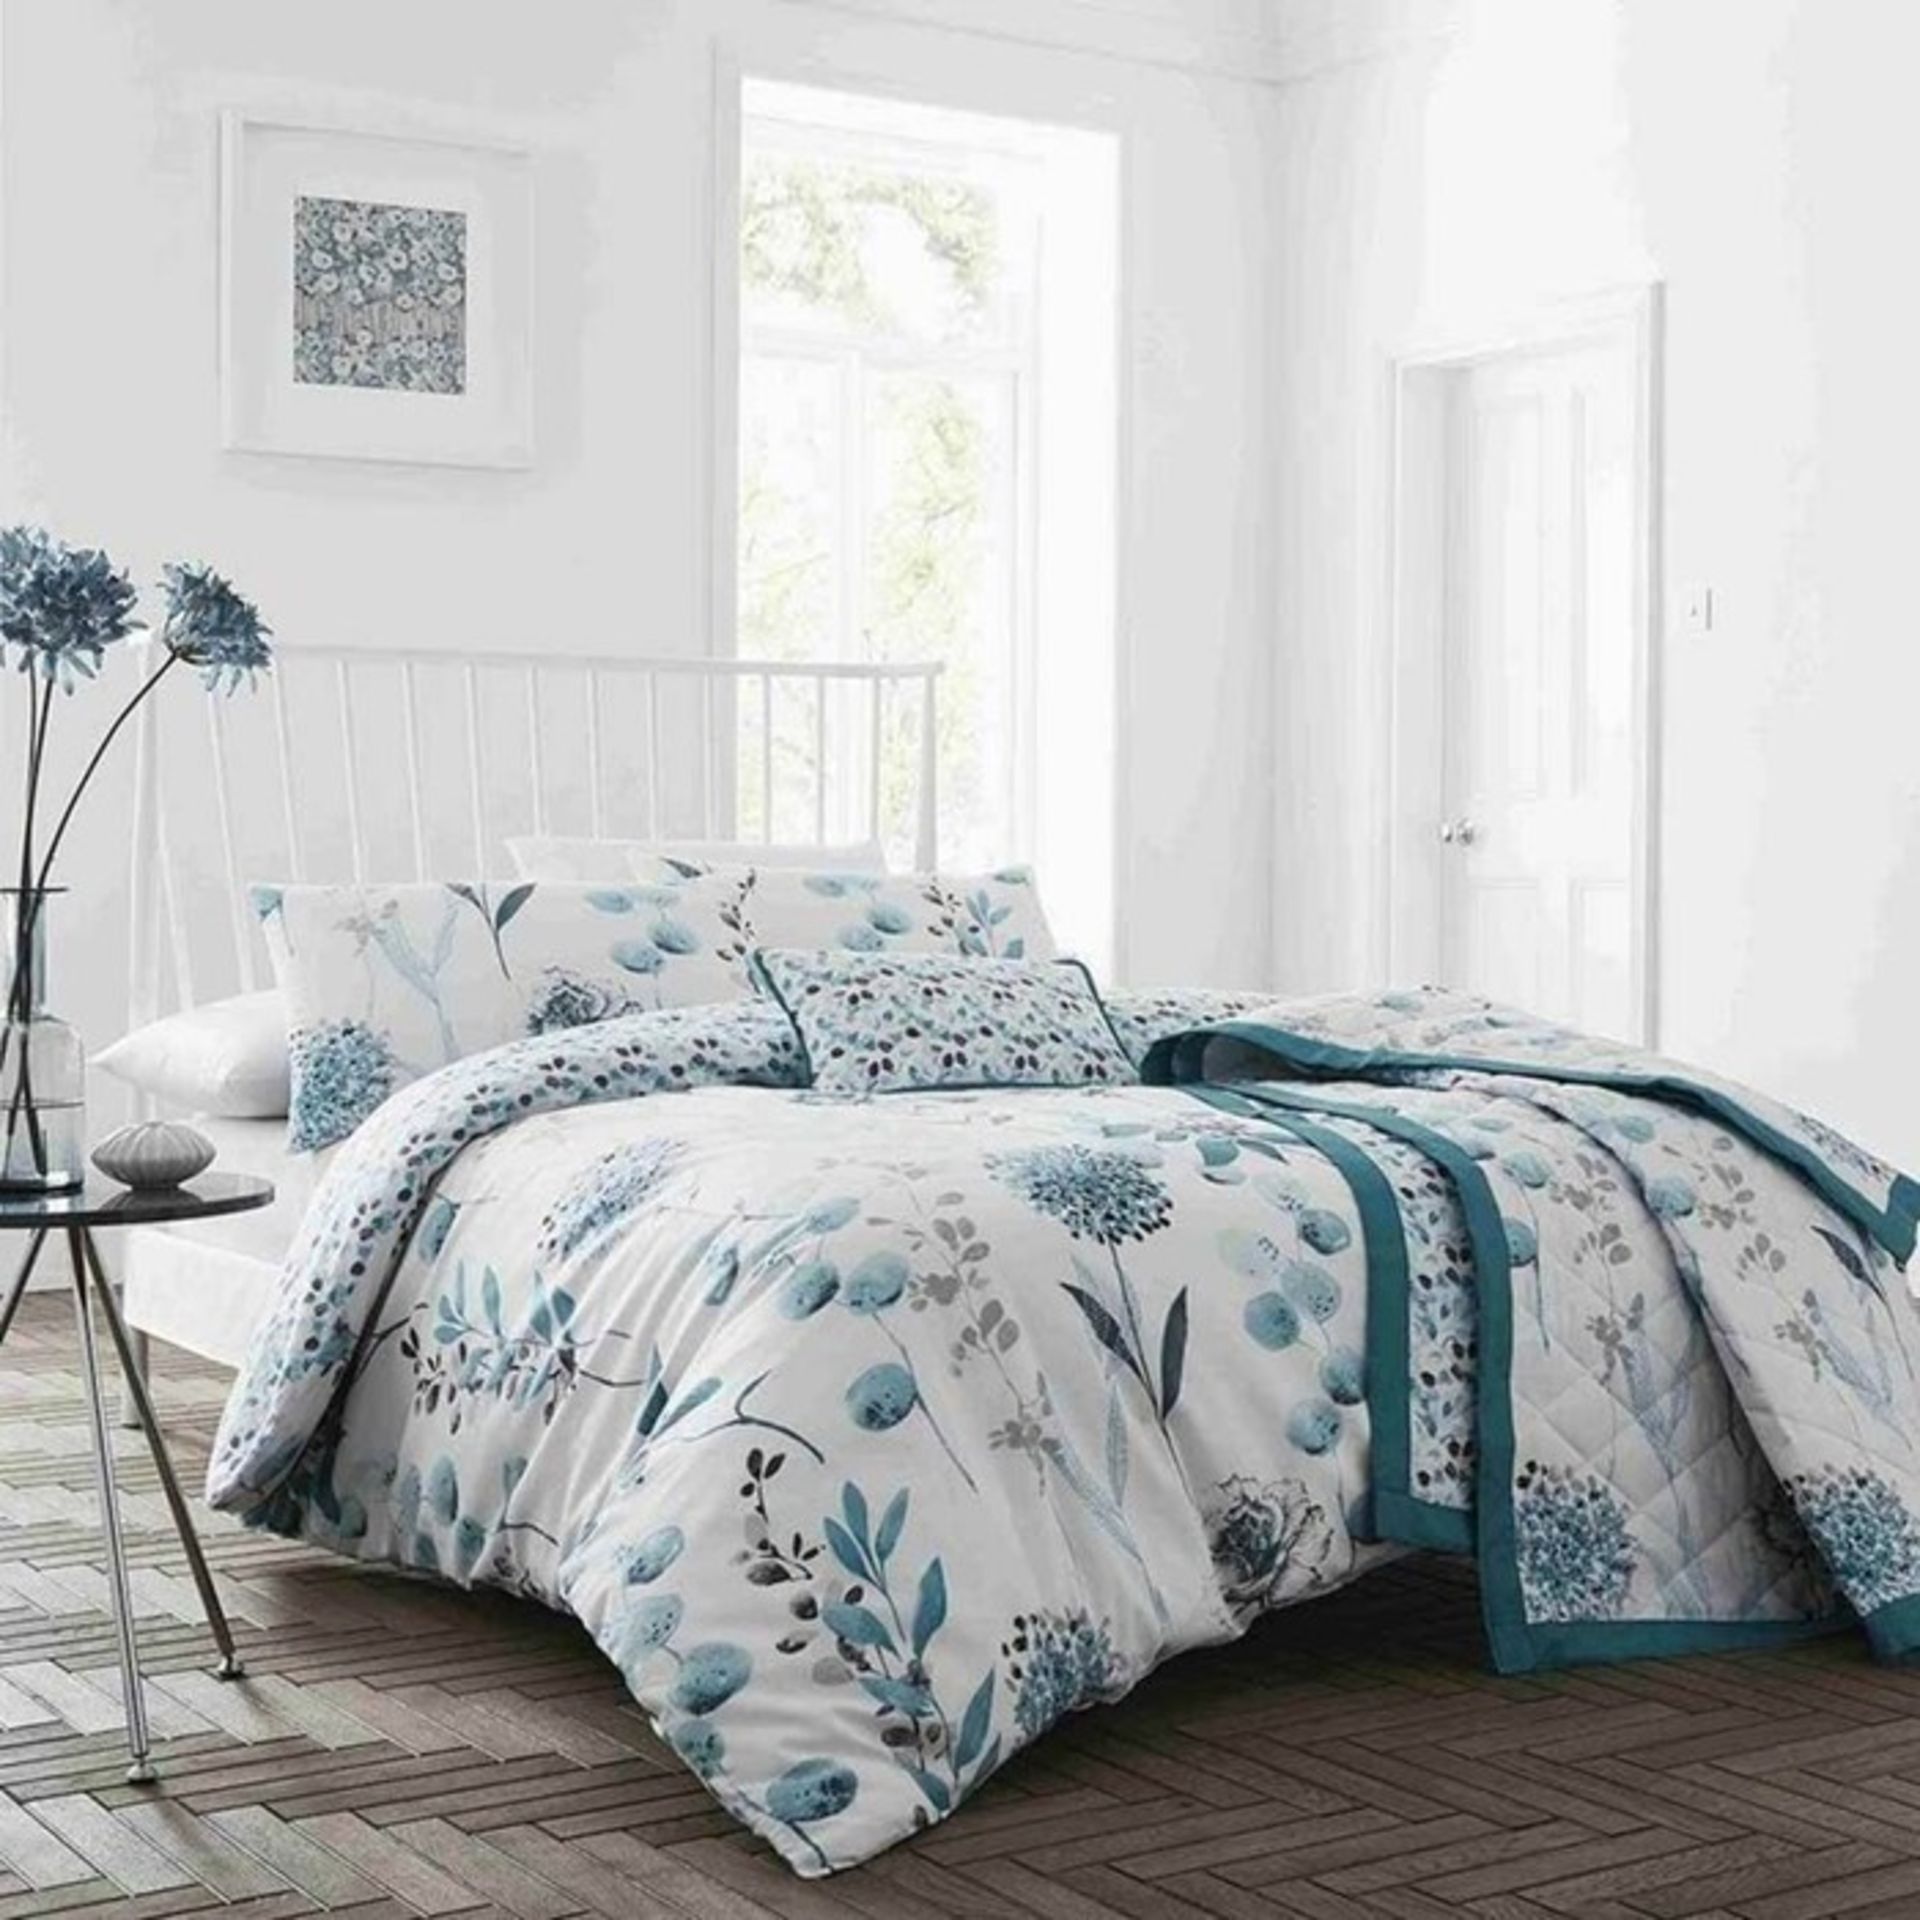 Lily Manor, Yair 200 TC Percale Duvet Cover Set (SINGLE)(TEAL) - RRP £17.99 (GCEA1026 - 19127/151)